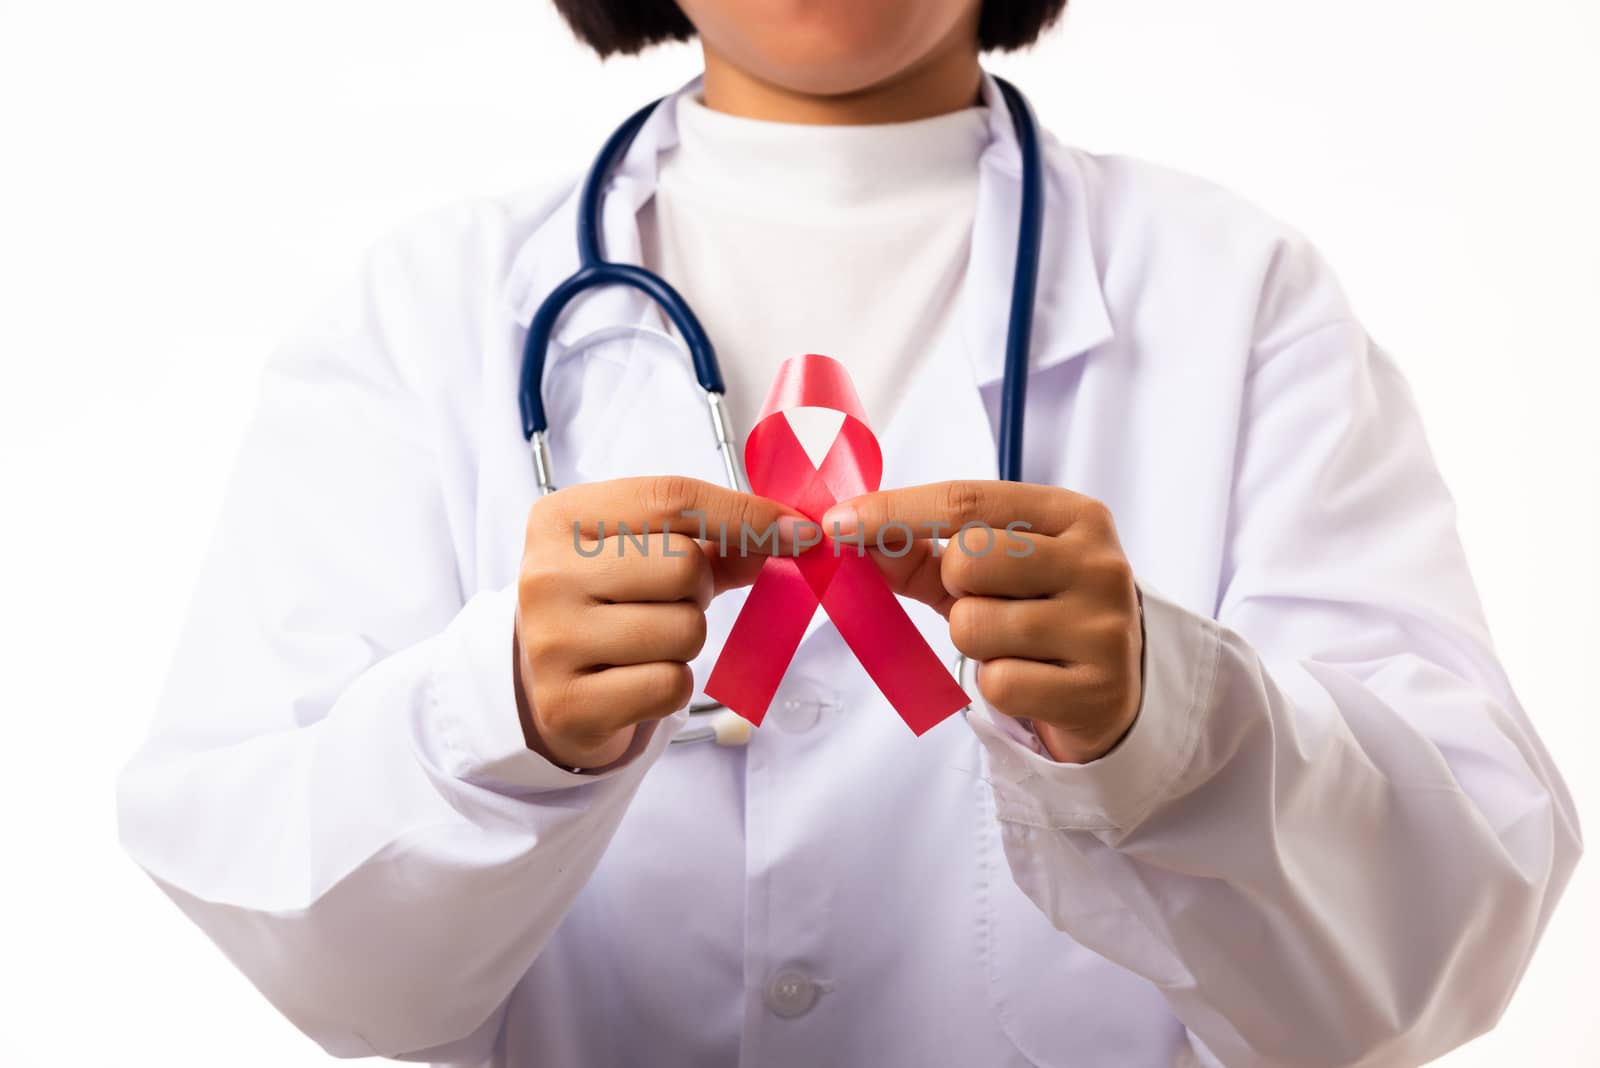 Woman medical doctors in uniform holding support HIV AIDS awareness red ribbon on hands in studio shot isolated on over white background, Healthcare and medicine, World aids day concept